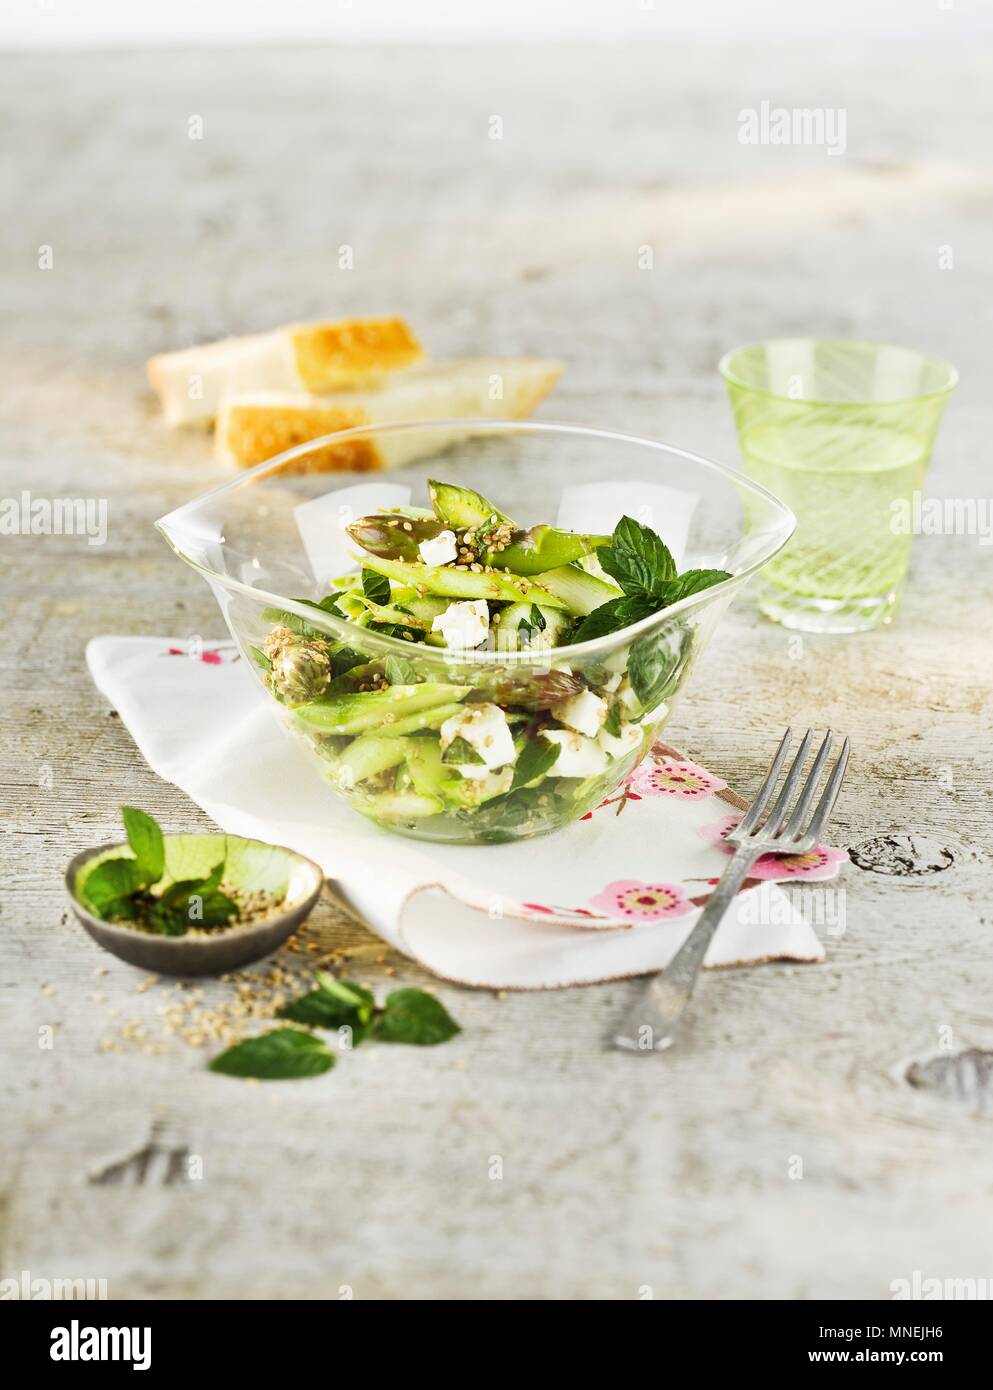 Green asparagus salad with sesame seeds and mint Stock Photo